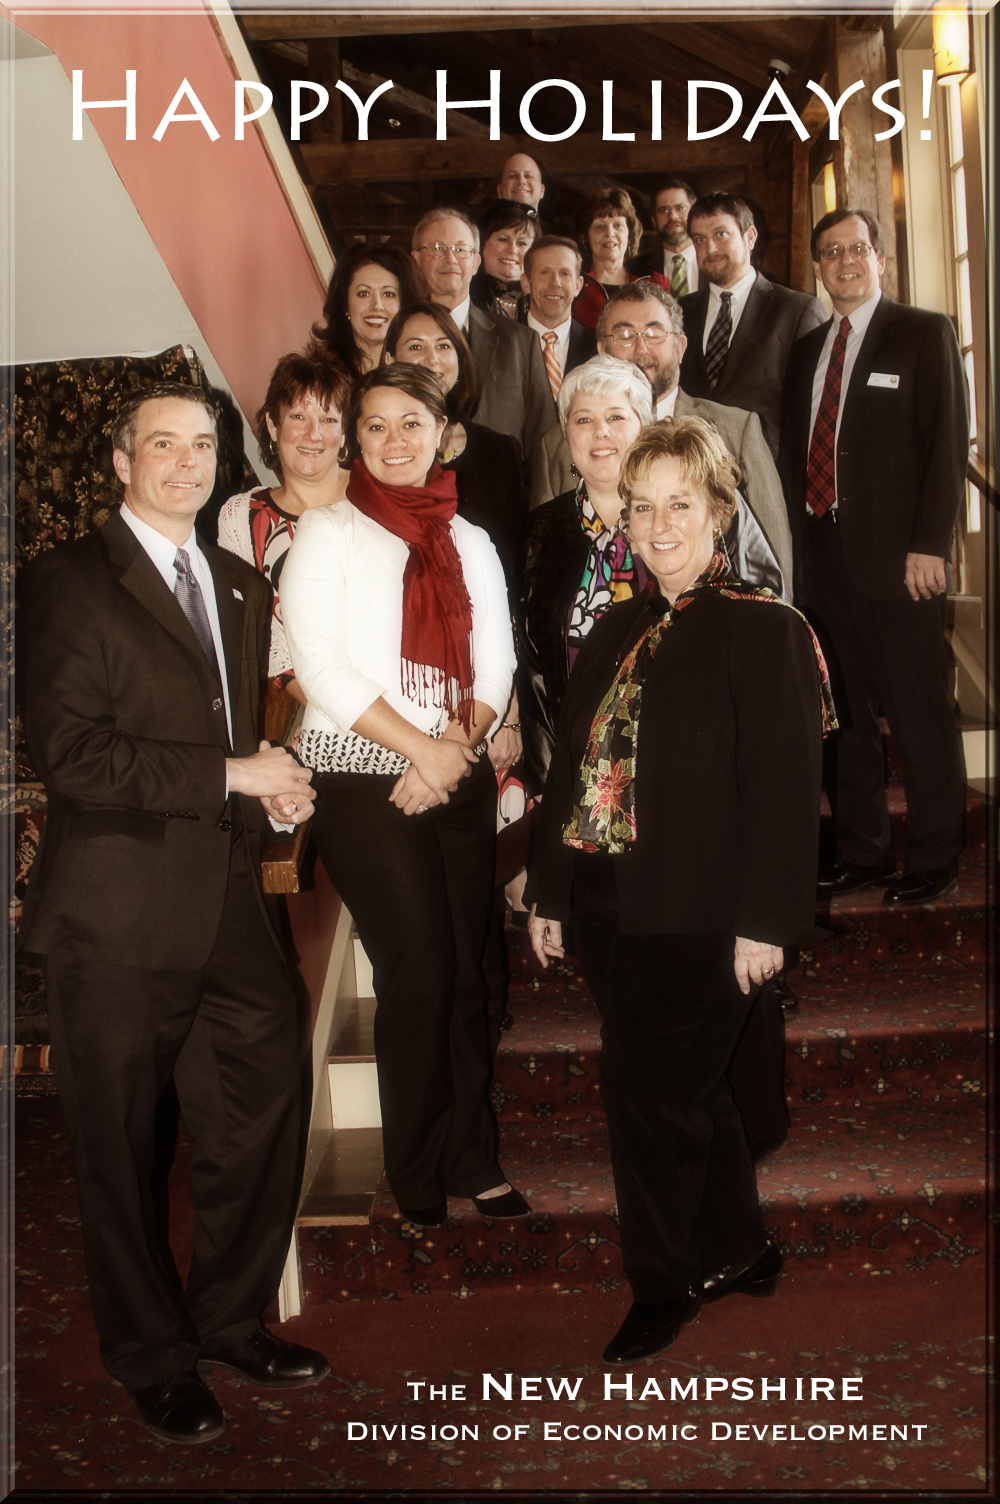 The Team at the New Hampshire Division of Economic Development